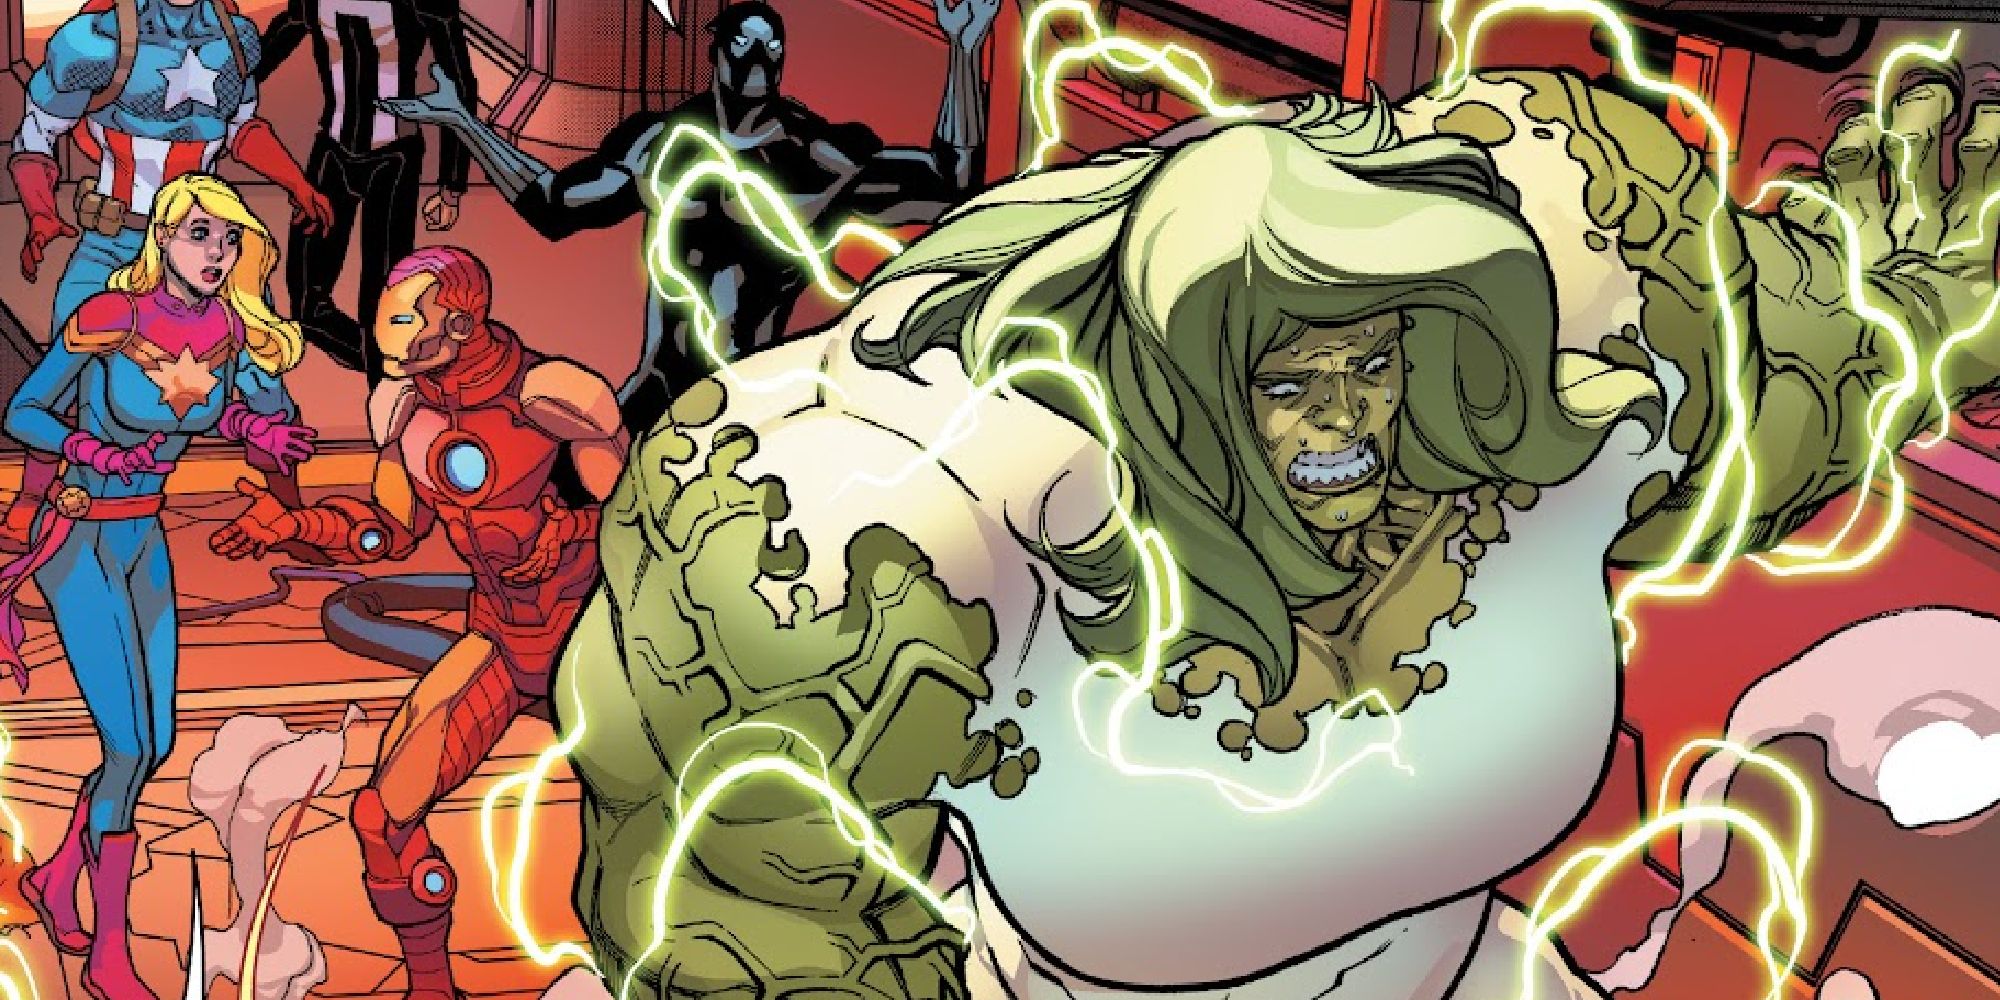 She-Hulk after absorbing the power of a warhead in the Winter Hulk arc